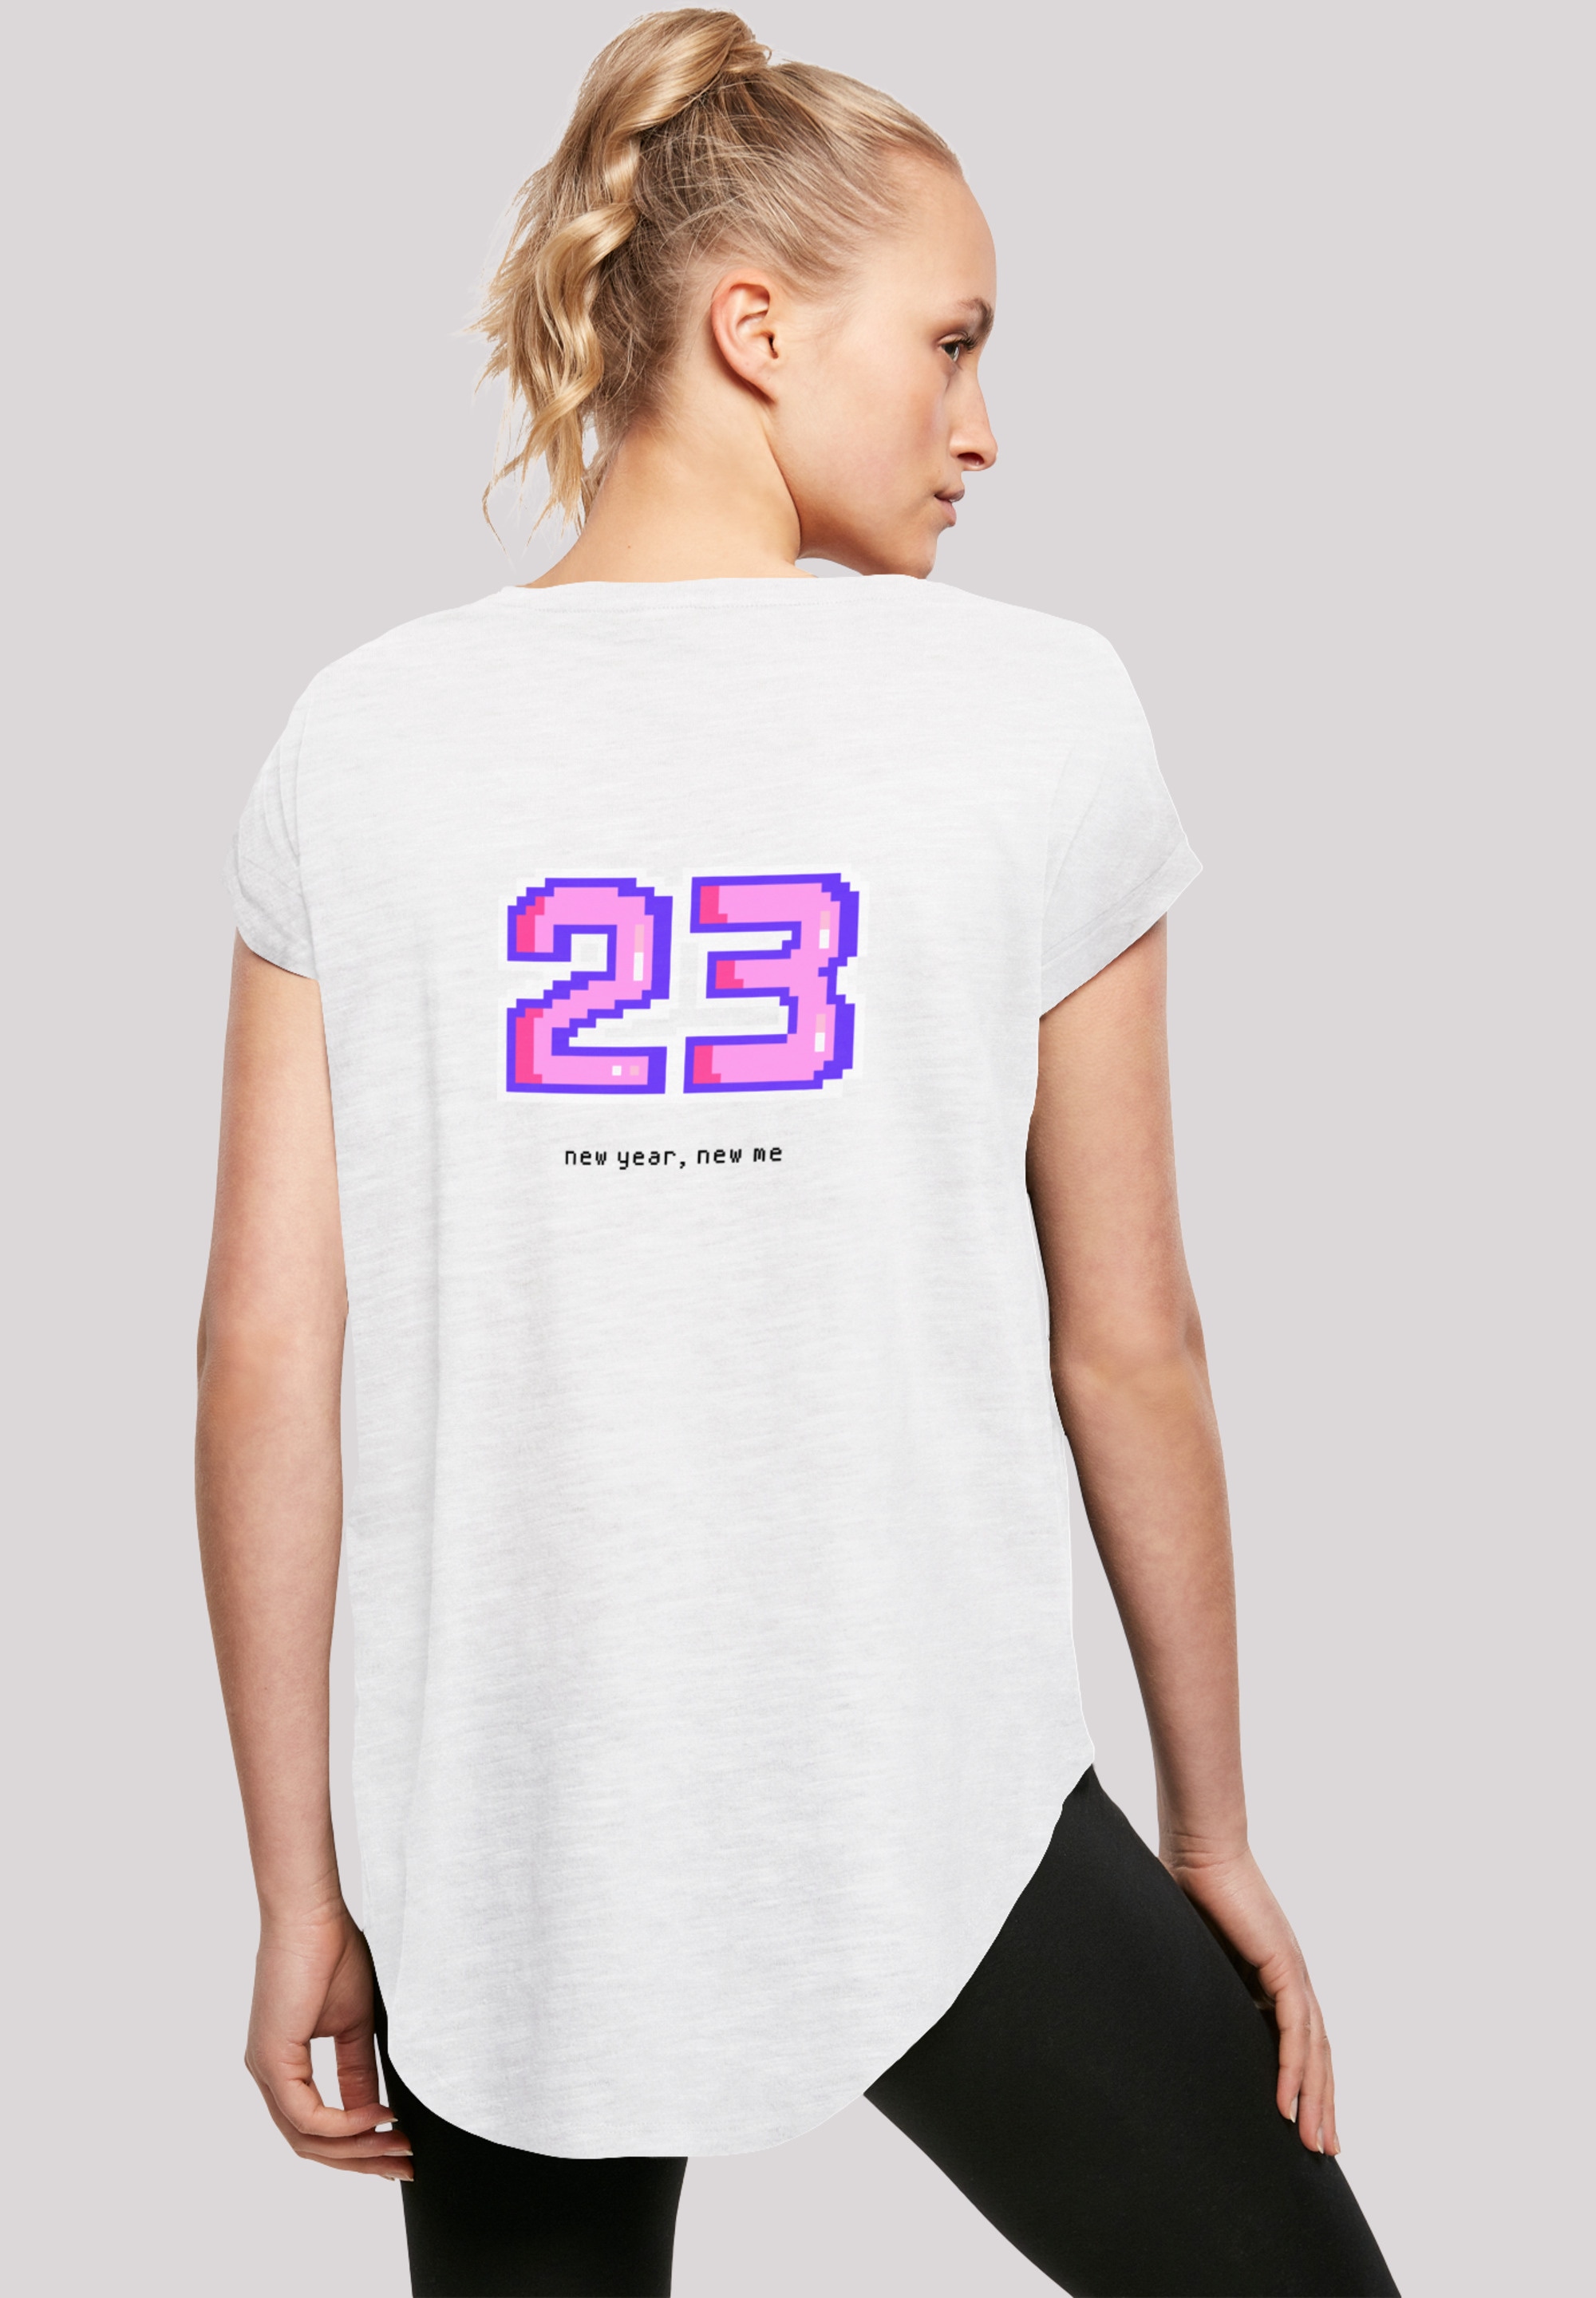 F4NT4STIC T-Shirt »F4NT4STIC Long Cut T-Shirt SIlvester Party Happy People  Only«, Print bestellen